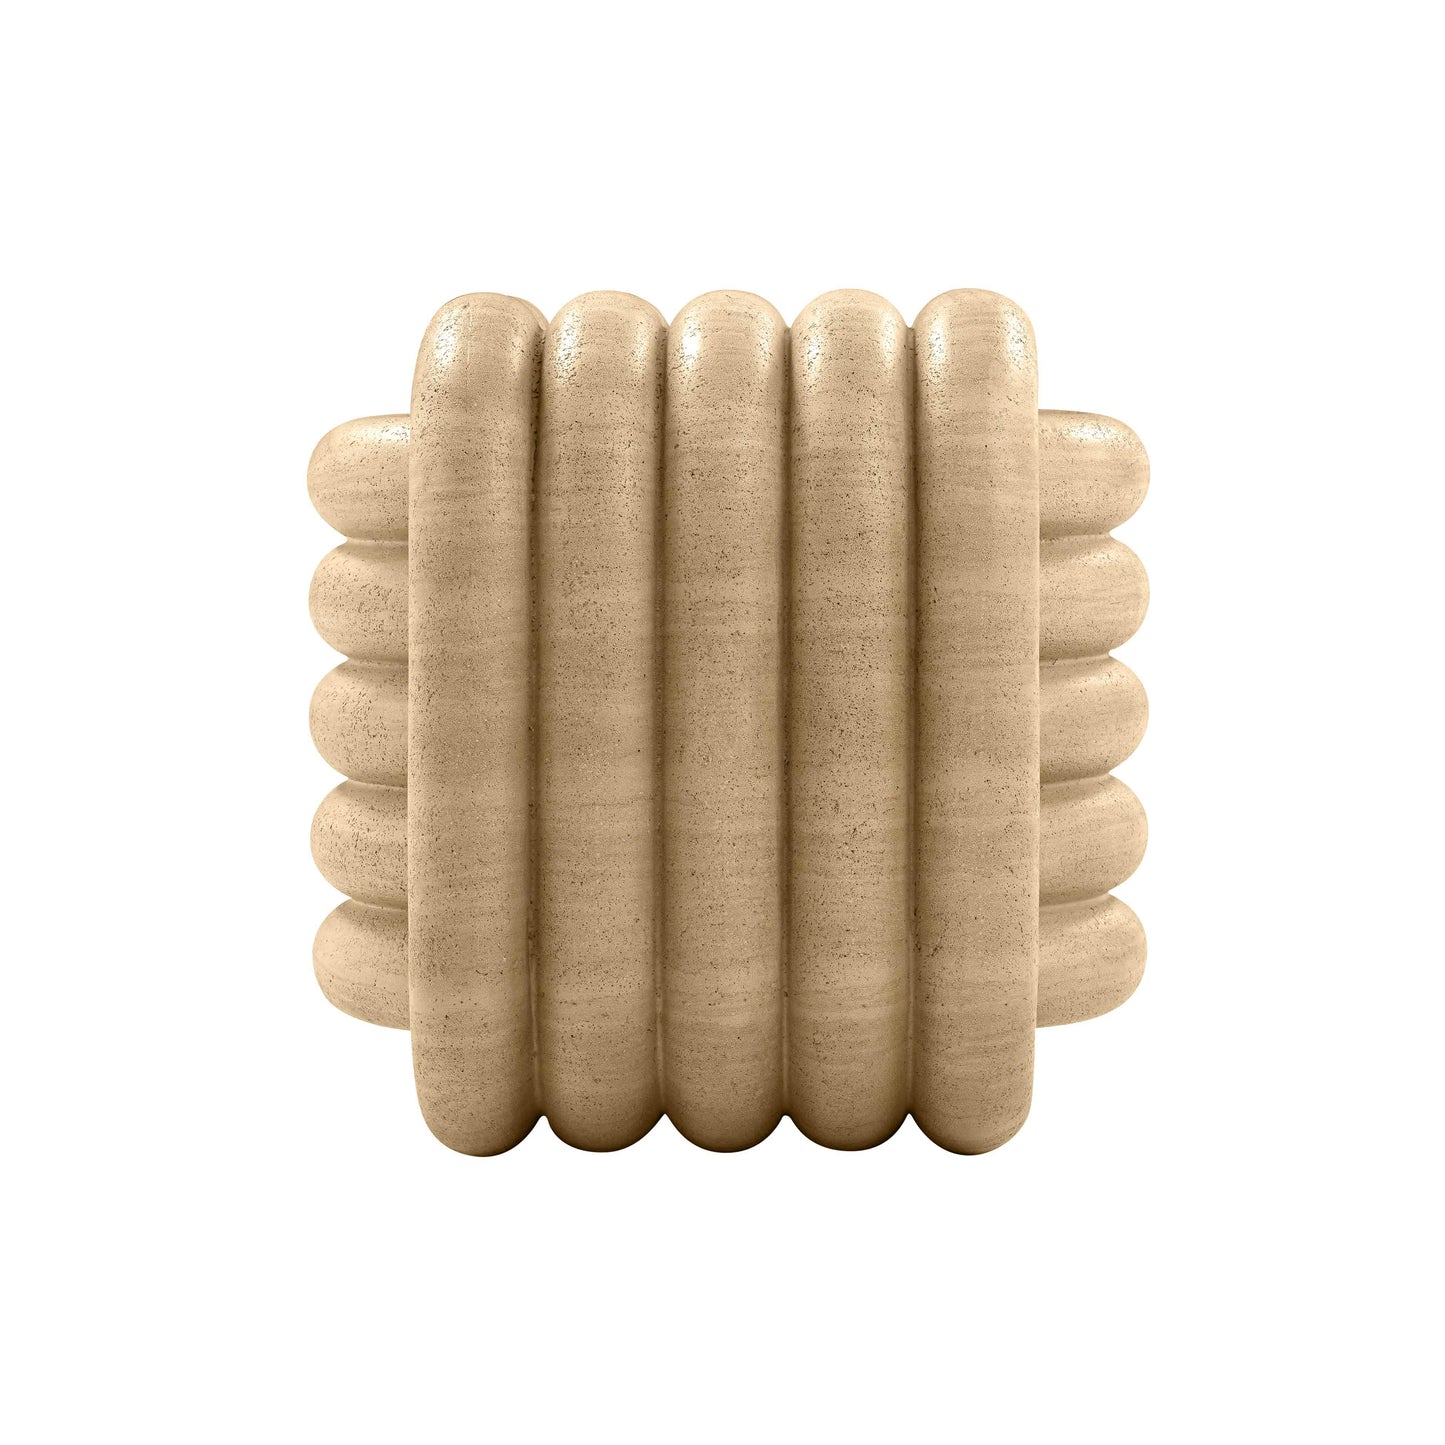 gotham knot faux travertine indoor / outdoor accent stool